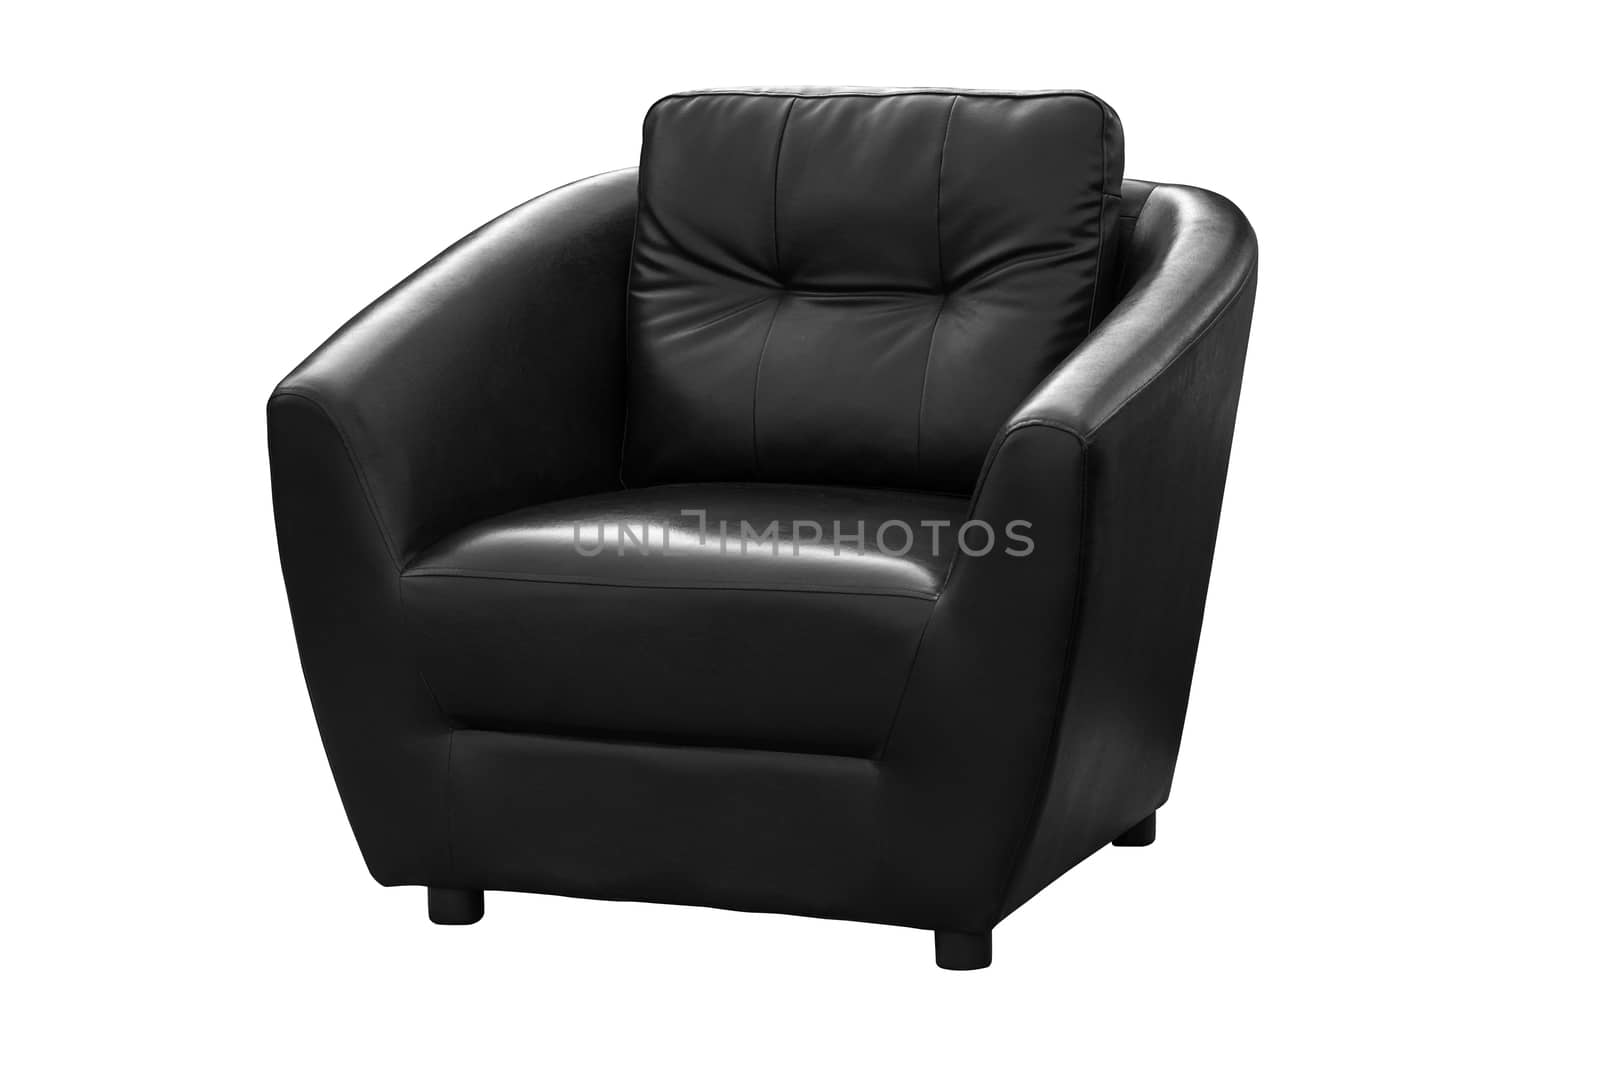 Black leather armchair isolated on white background, with clipping path.